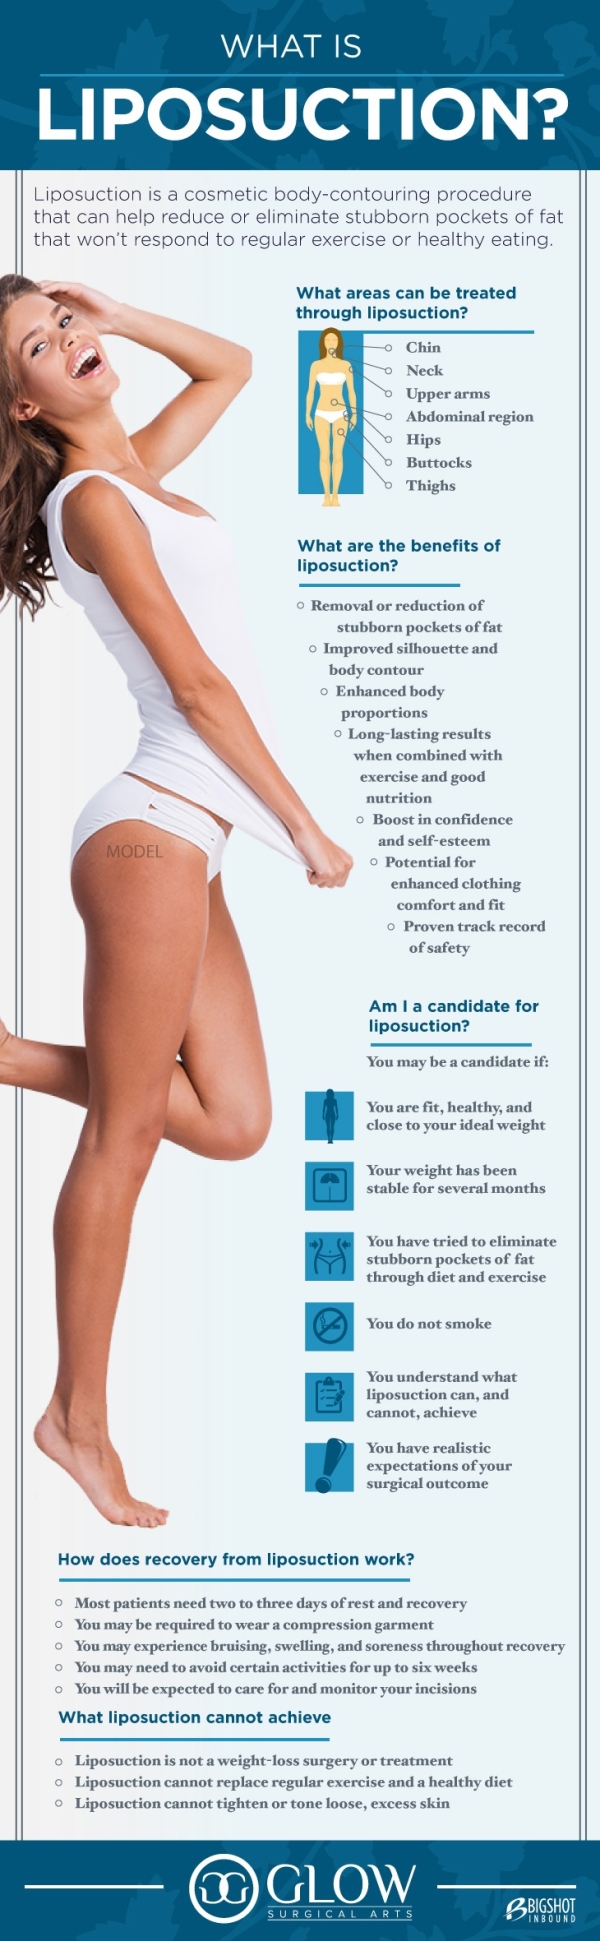 The Benefits Of Liposuction For Body Contouring [Infographic]